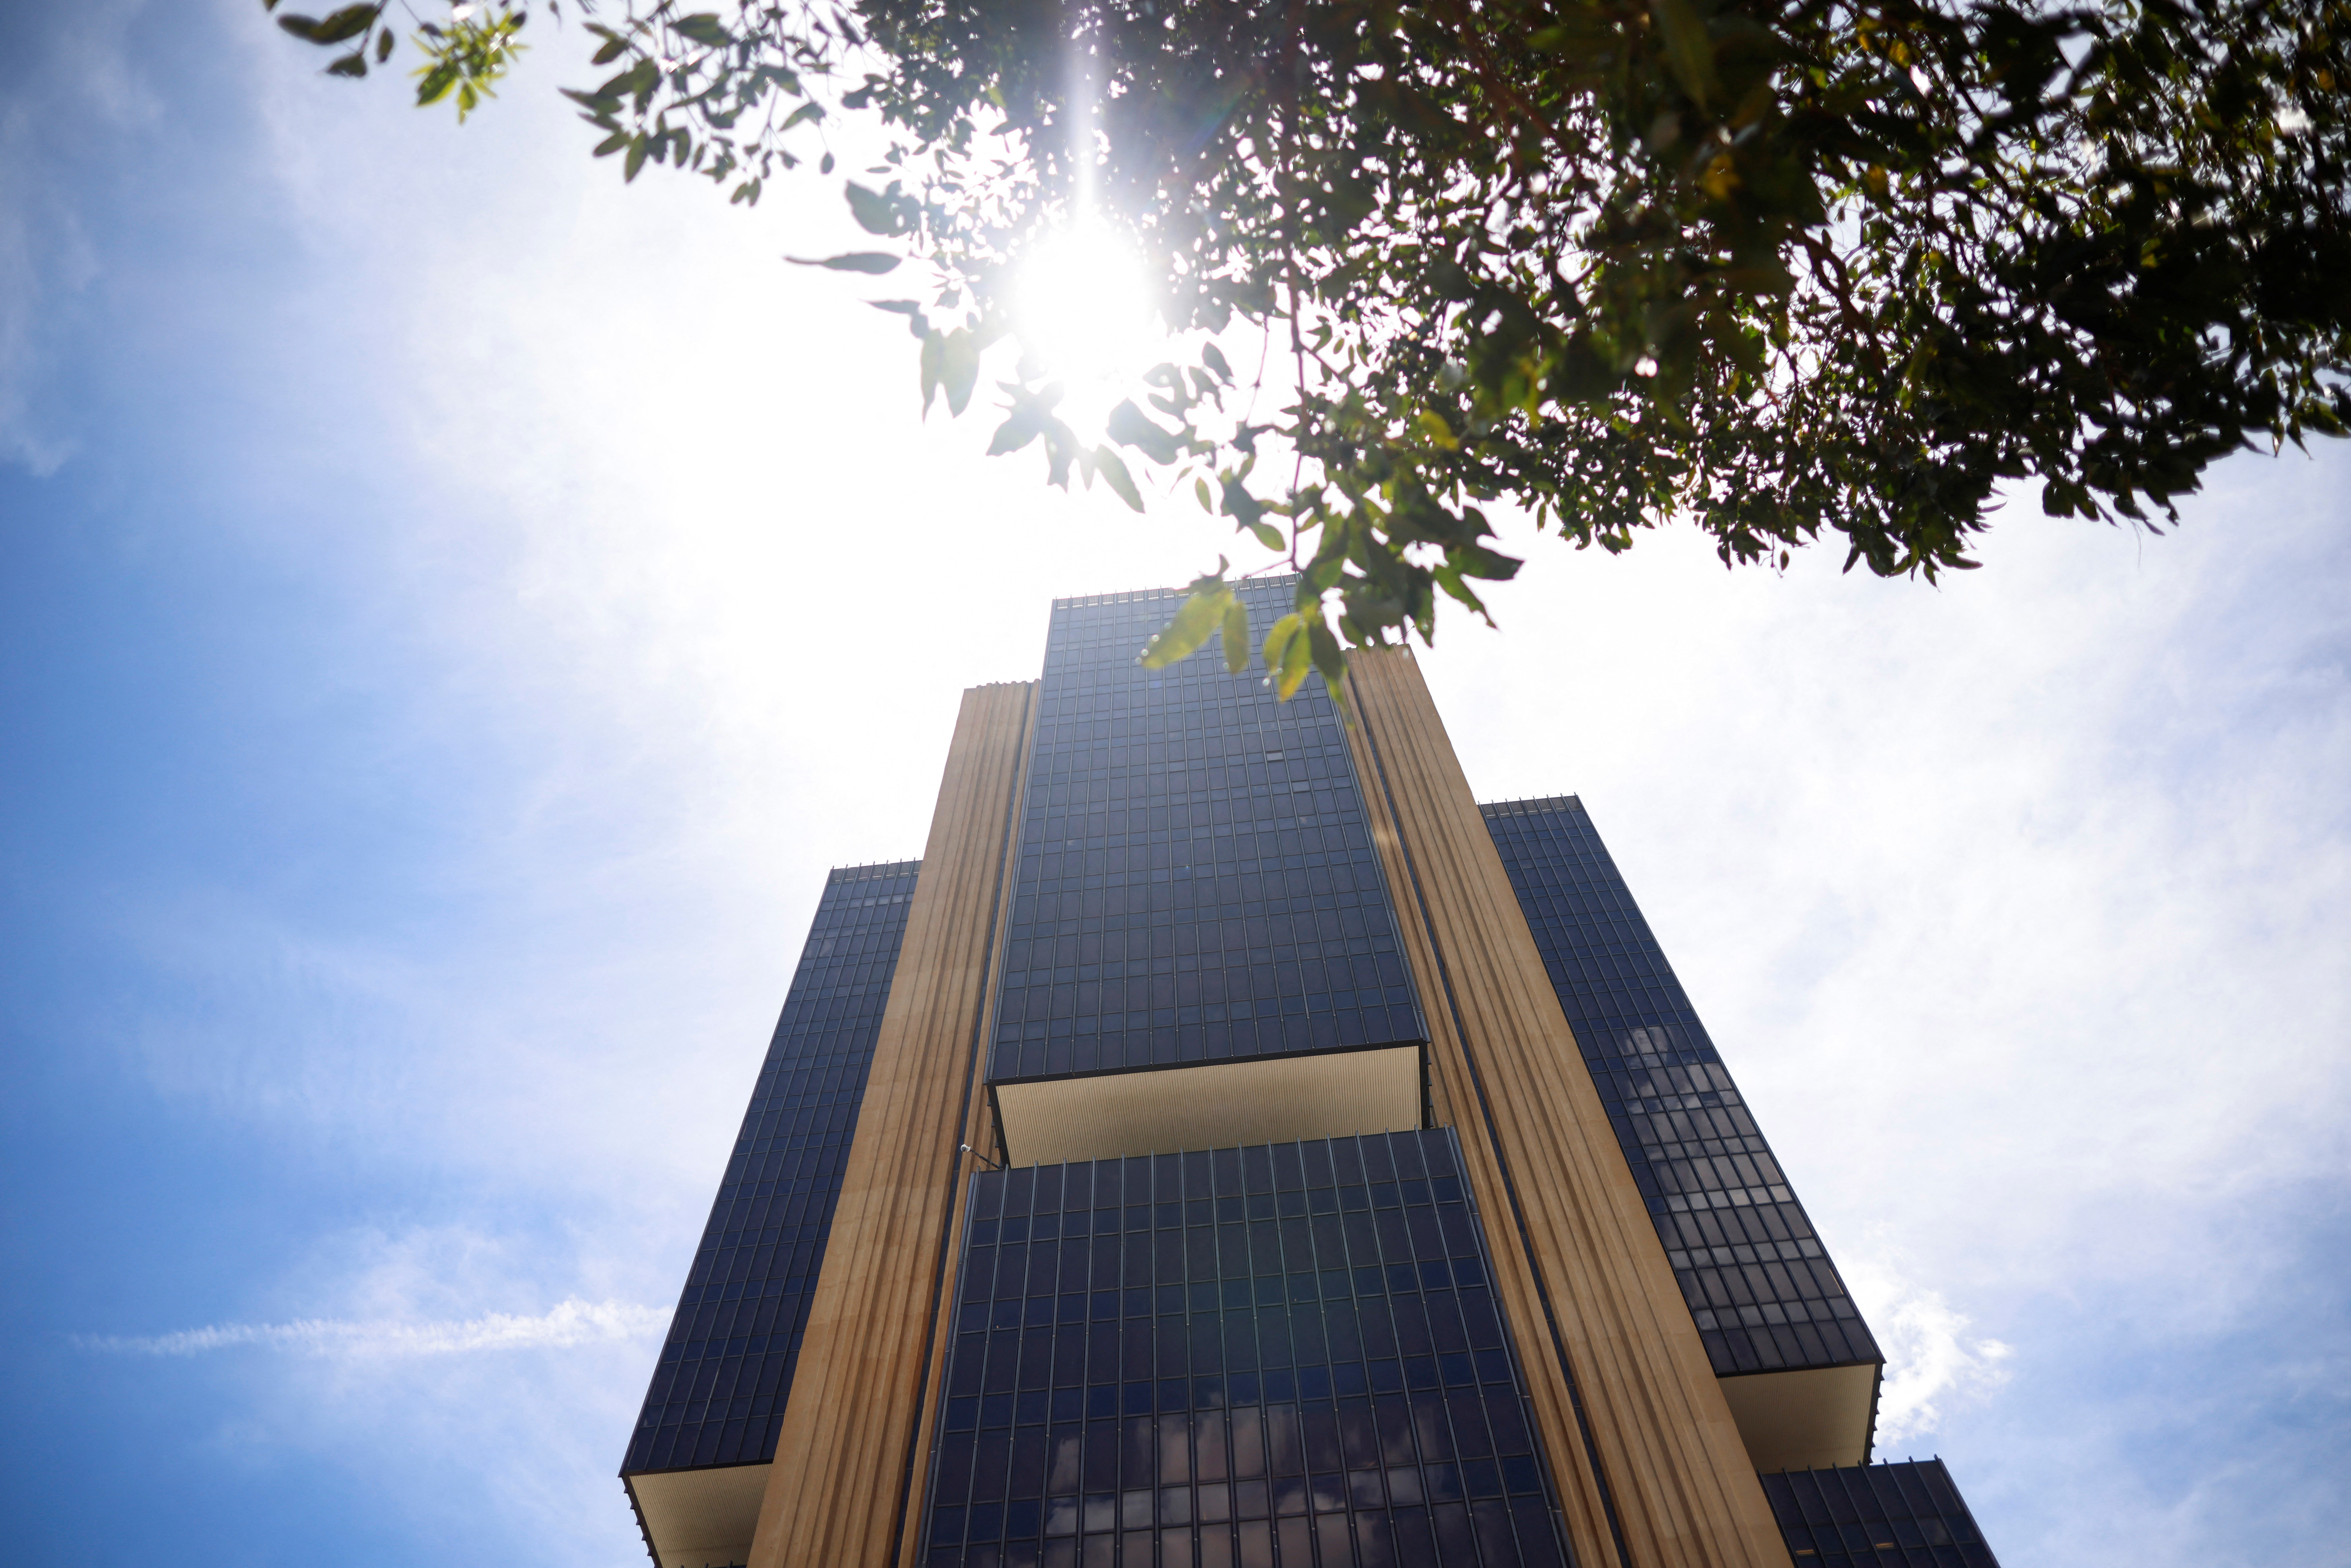 Brazil's Central Bank Cuts Interest Rate by Half Point as